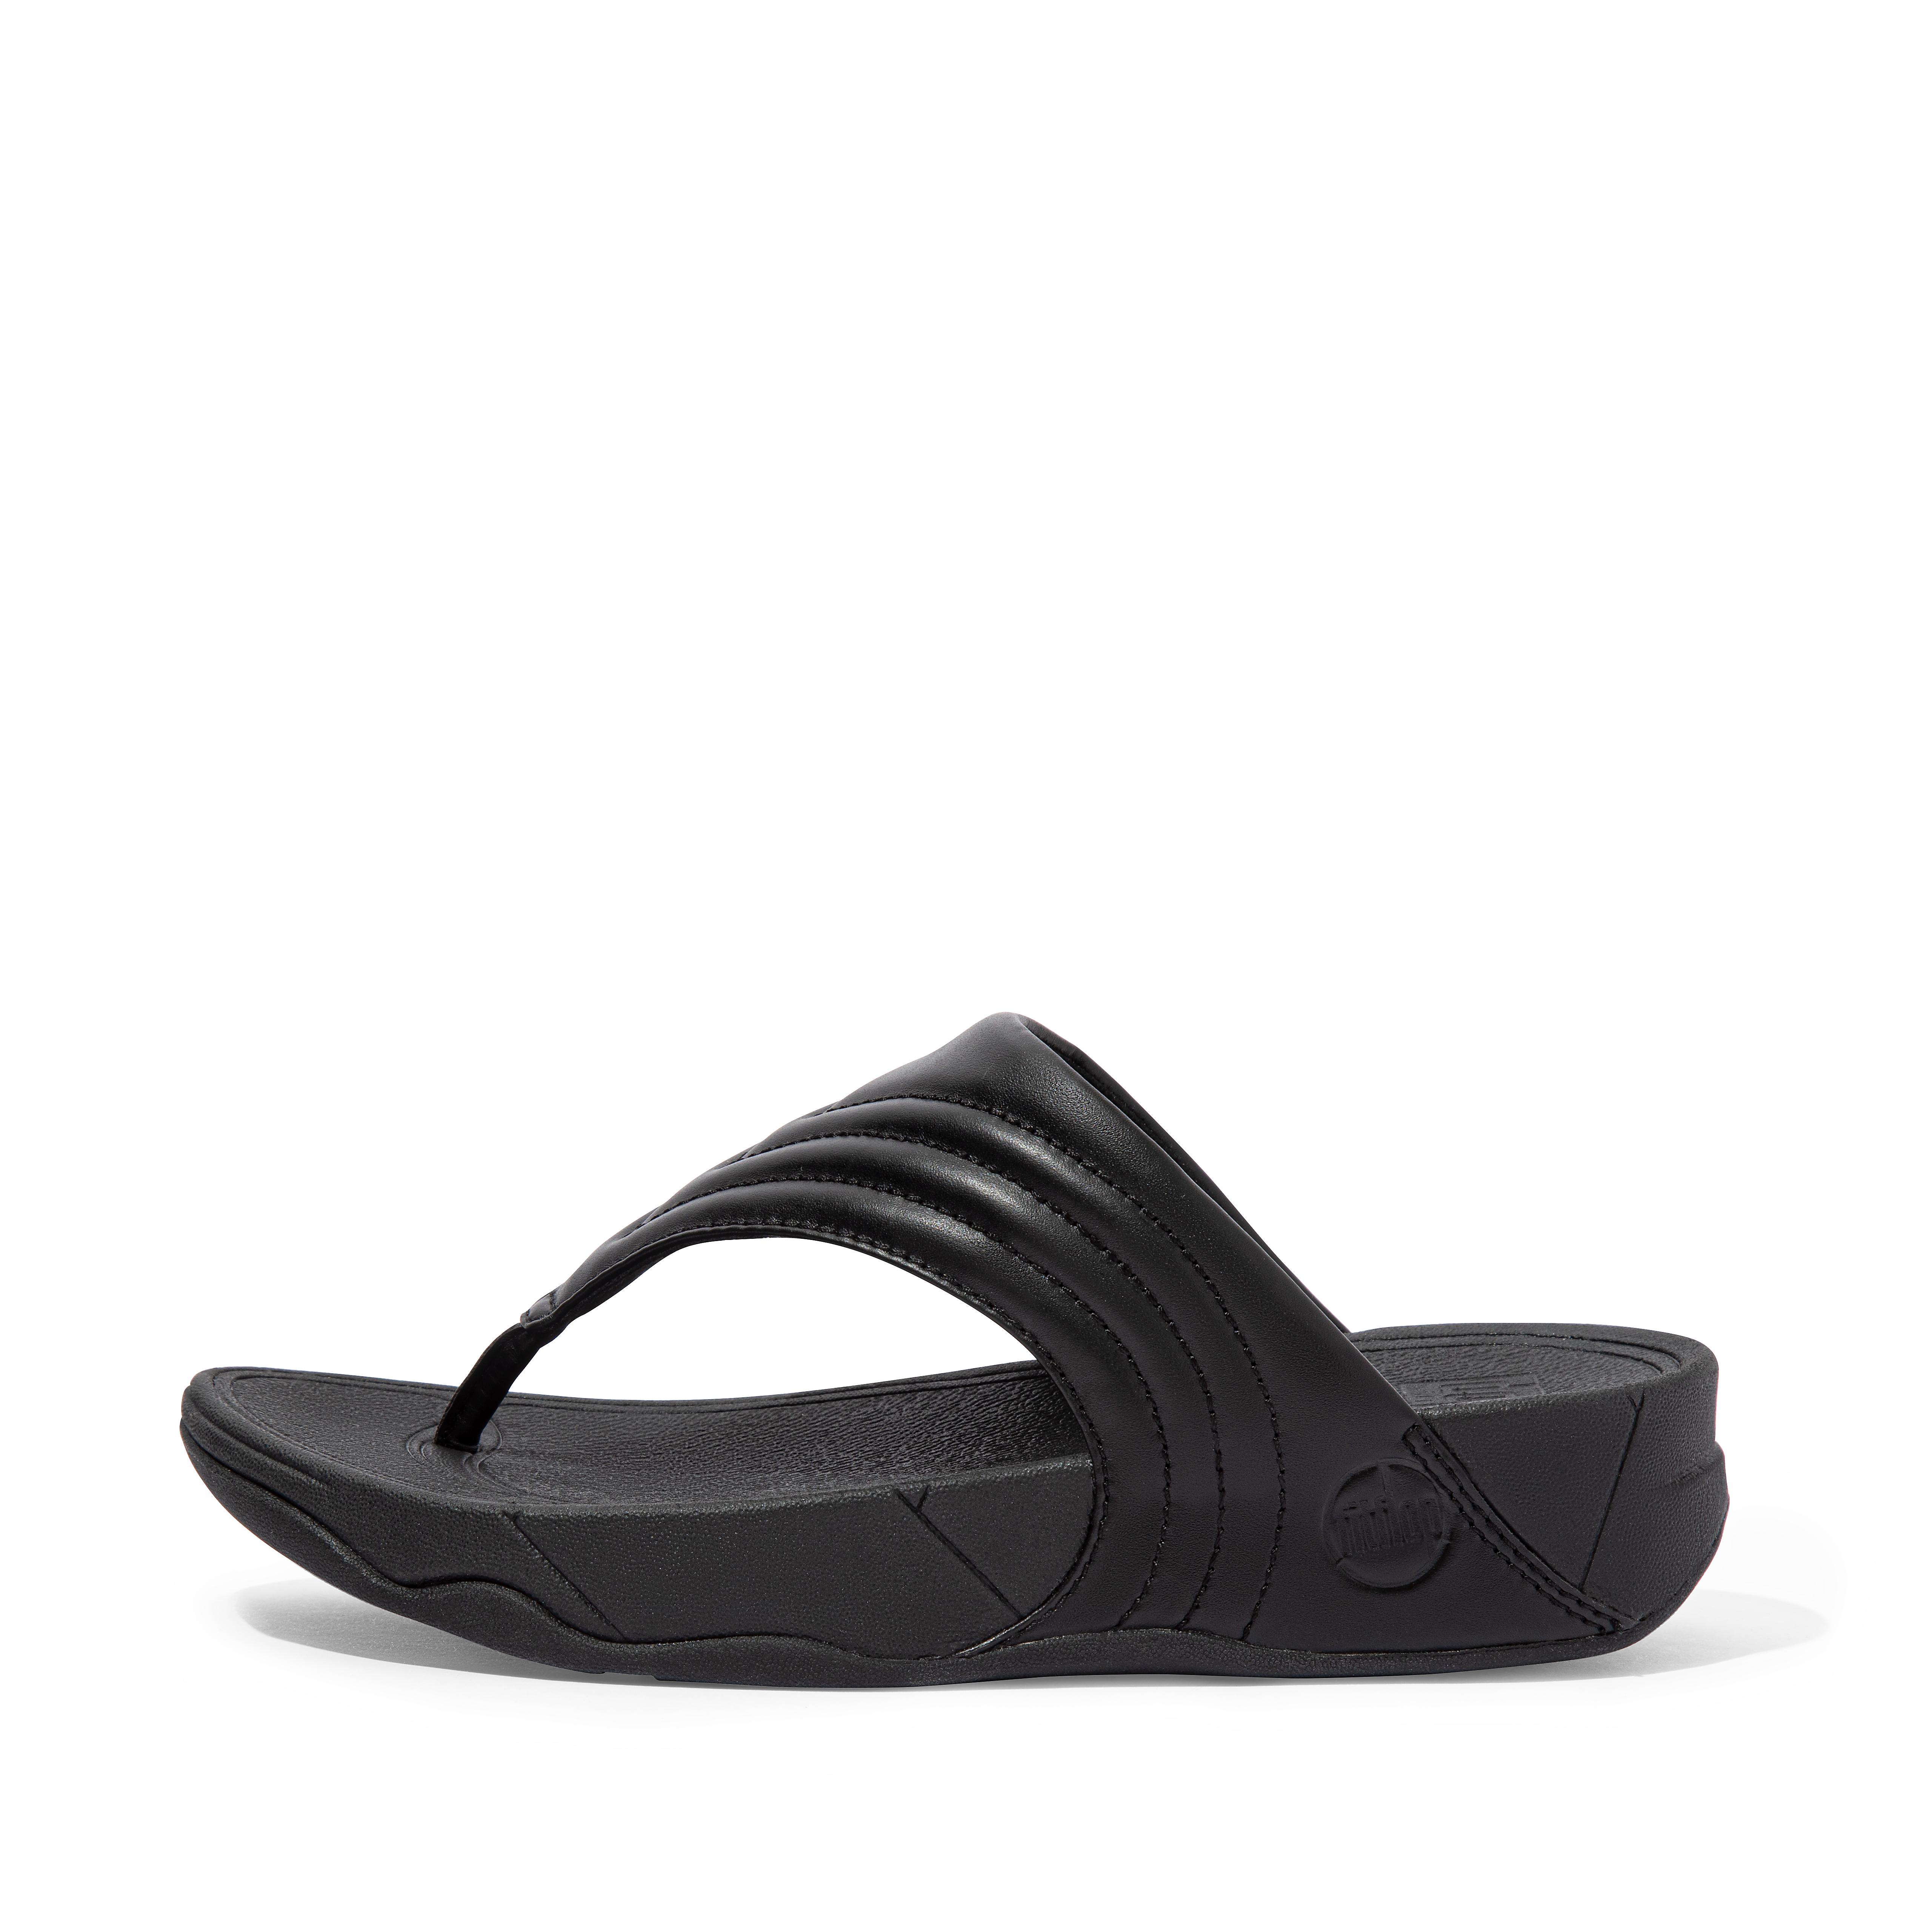 2021's Sandal Trends Have Arrived, and I'm Buying Them All | Who What ...